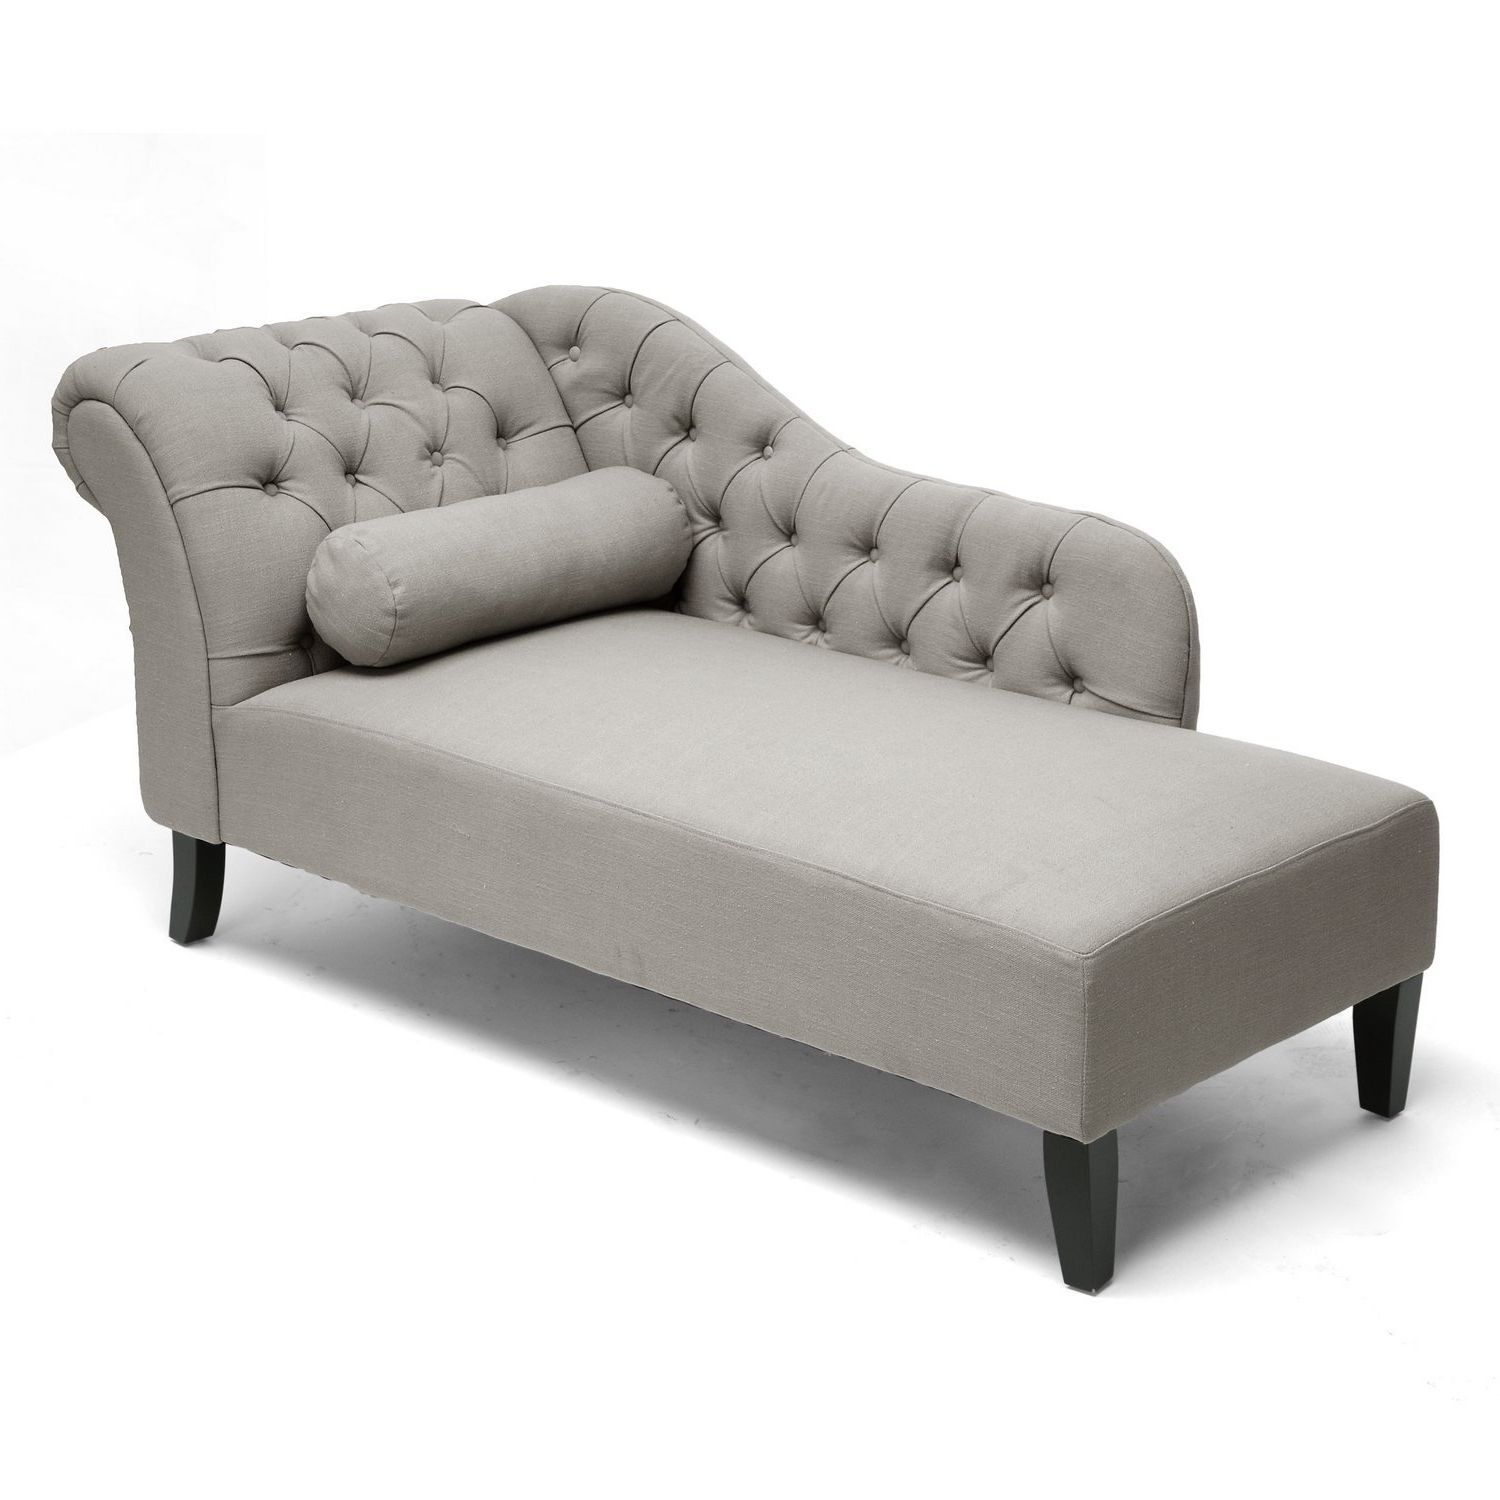 Well Known Amazon: Baxton Studio Aphrodite Tufted Putty Linen Modern Pertaining To Tufted Chaise Lounges (View 3 of 15)